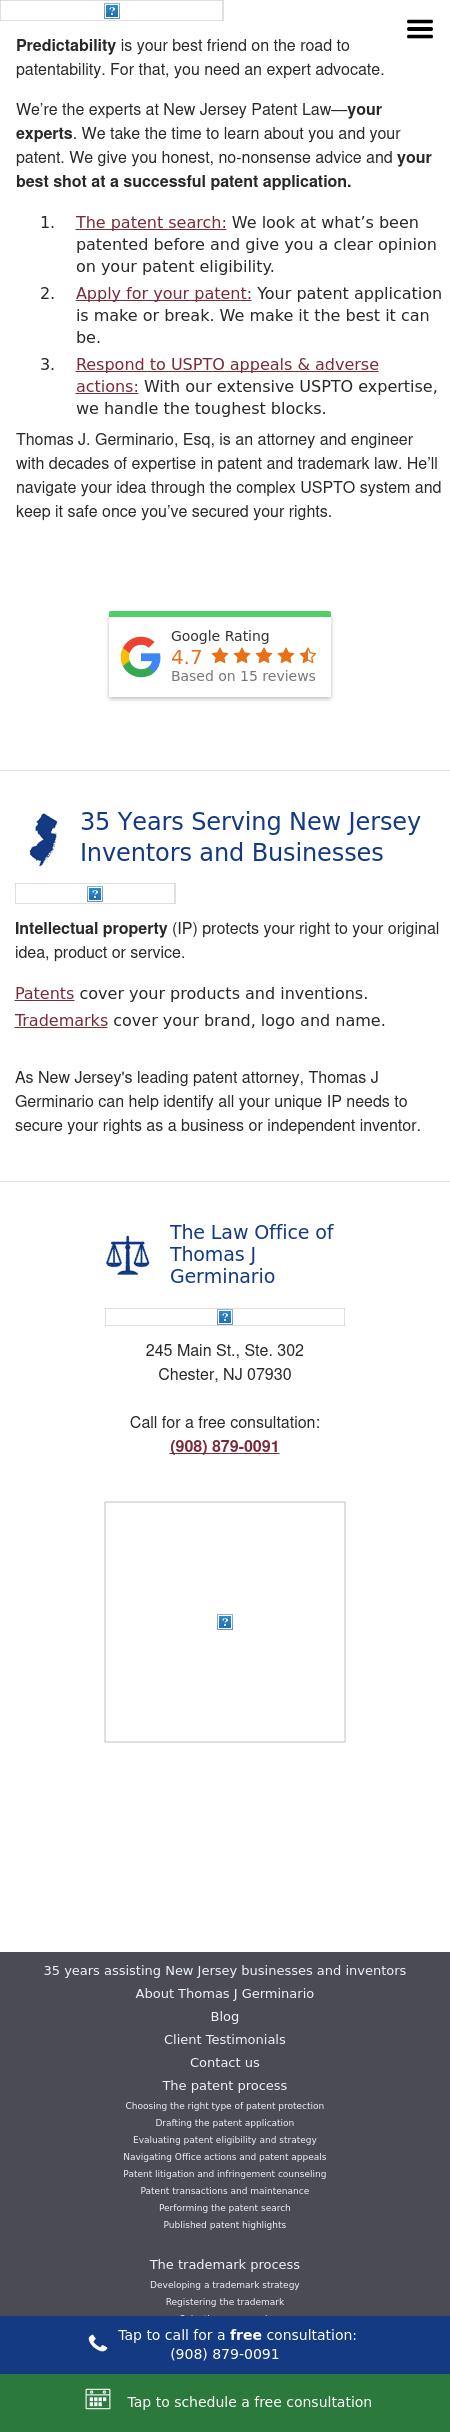 Law Office of Thomas J. Germinario - Chester NJ Lawyers